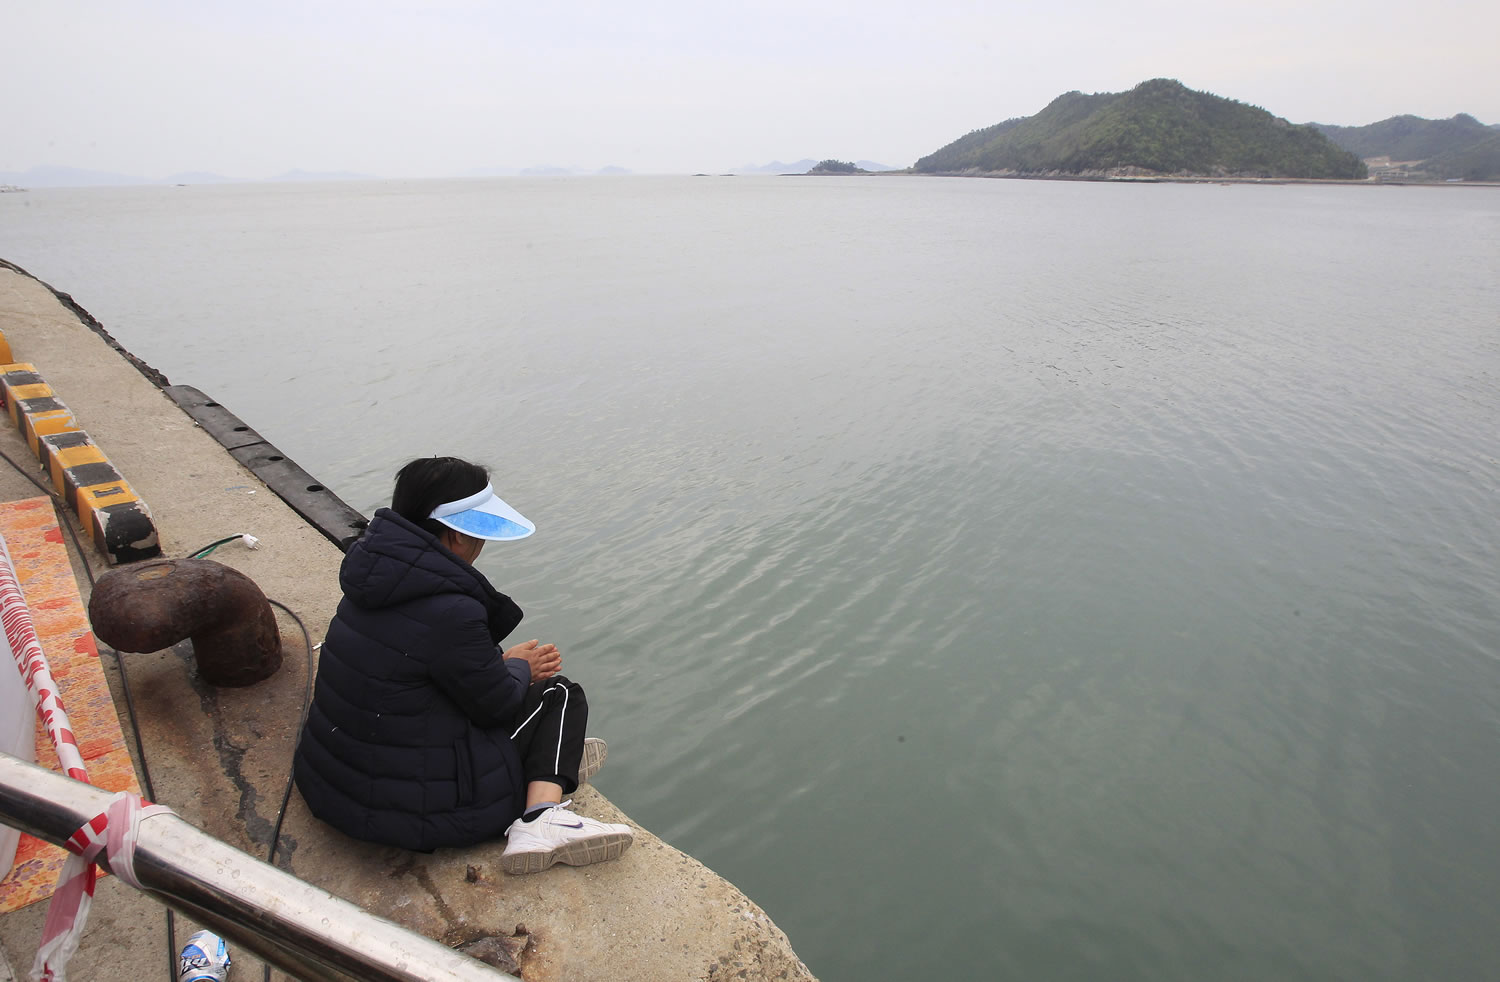 A relative of a passenger aboard the sunken Sewol ferry looks toward the sea as she awaits news on her missing loved one at a port in Jindo, South Korea, Saturday, April 26, 2014. All 15 people involved in navigating the South Korean ferry that sank and left 302 people dead or missing are now in custody after authorities on Saturday detained four more crew members, a prosecutor said.